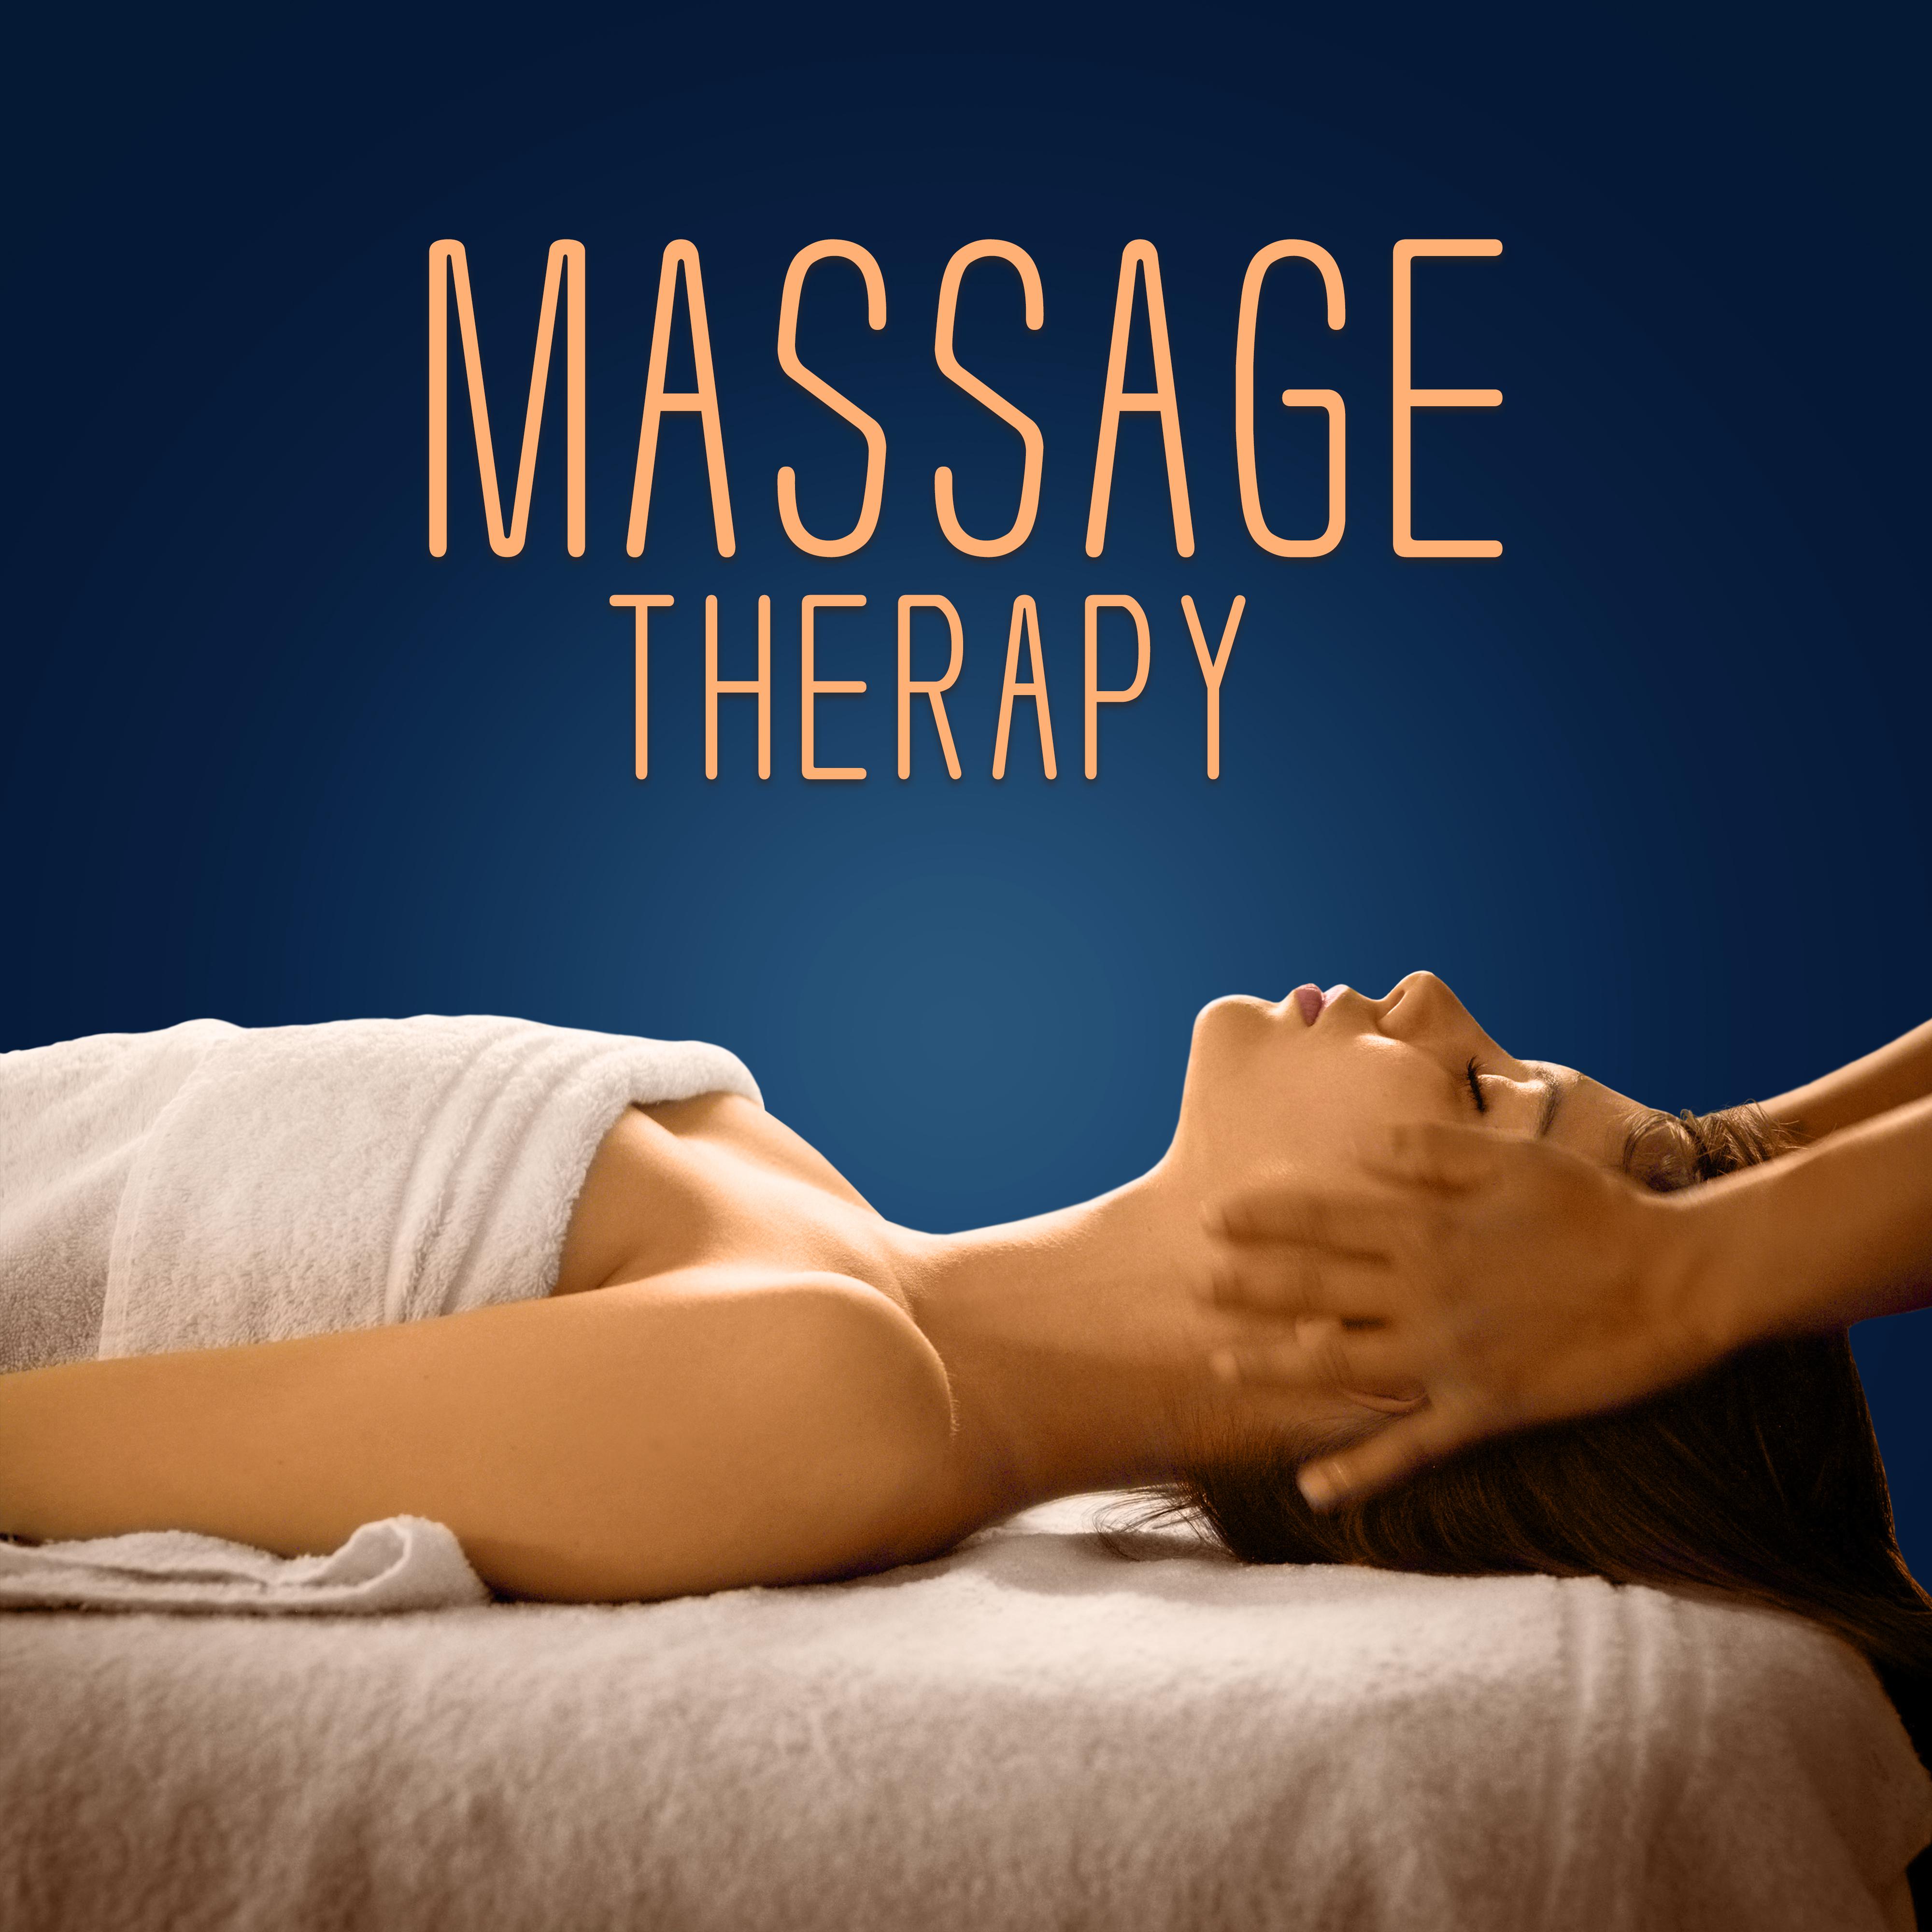 Massage Therapy – Zen Sounds, Healing Nature for Relax, Spa Music, Singing Birds, Soothing Rain